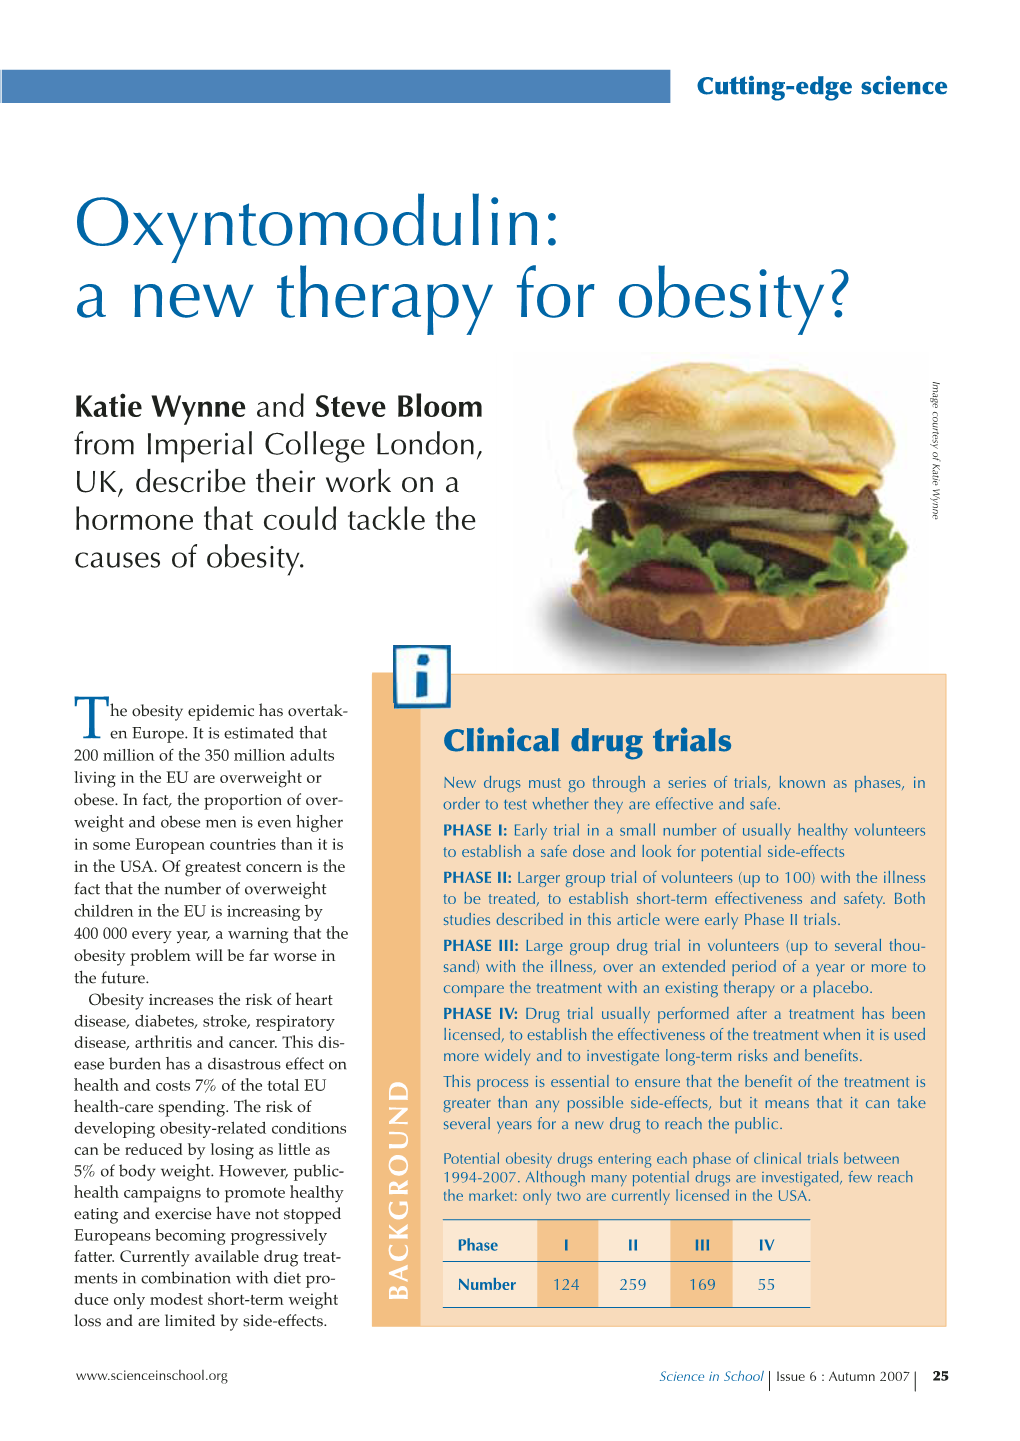 Oxyntomodulin: a New Therapy for Obesity?